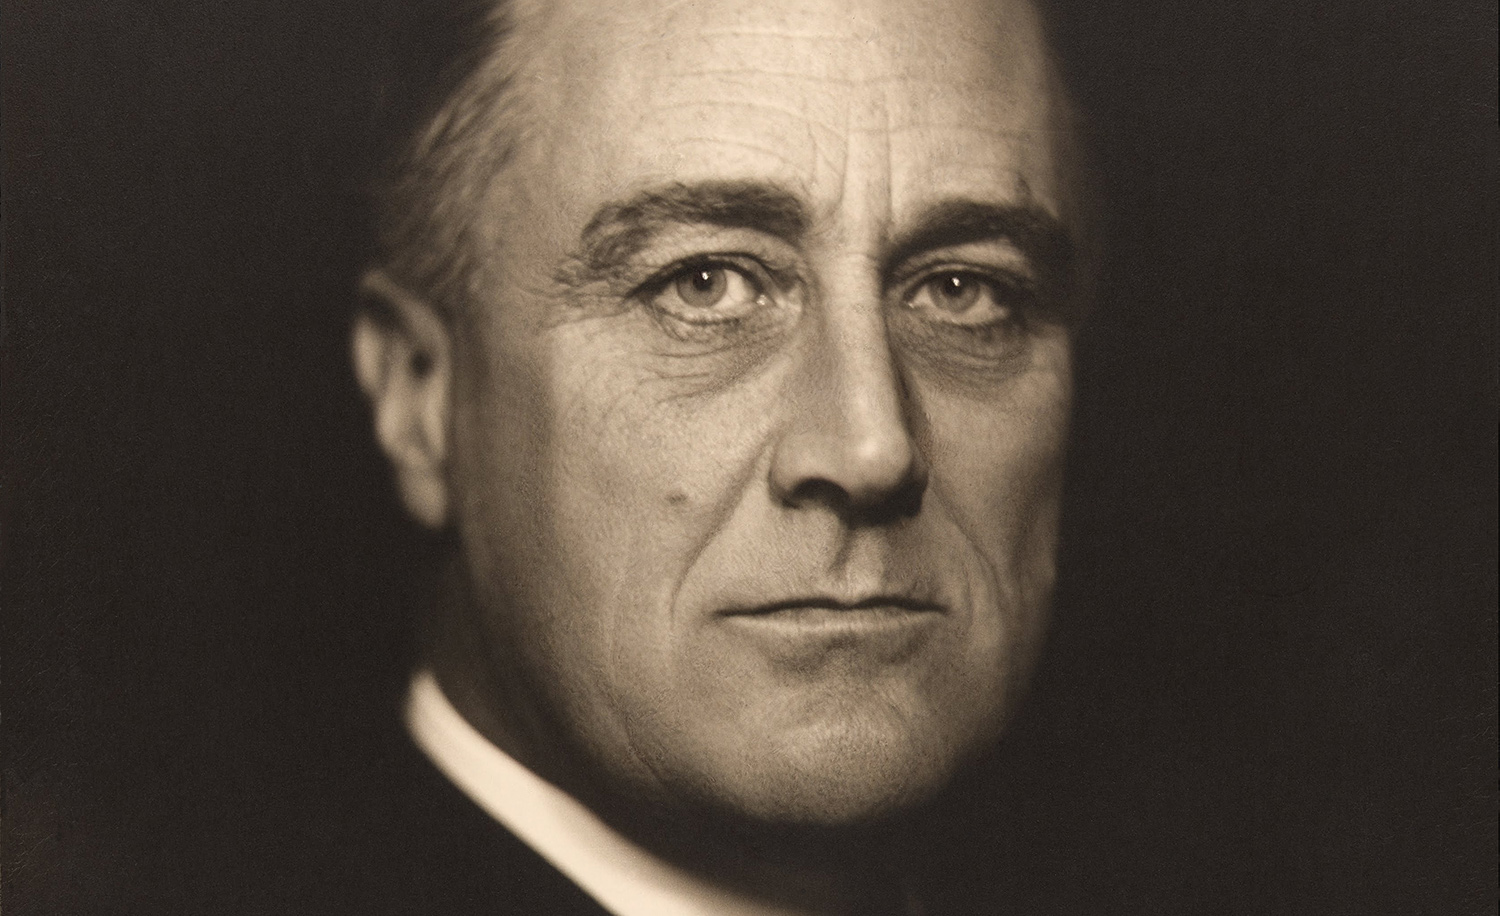 Did FDR Really Abandon the Jews of Europe?